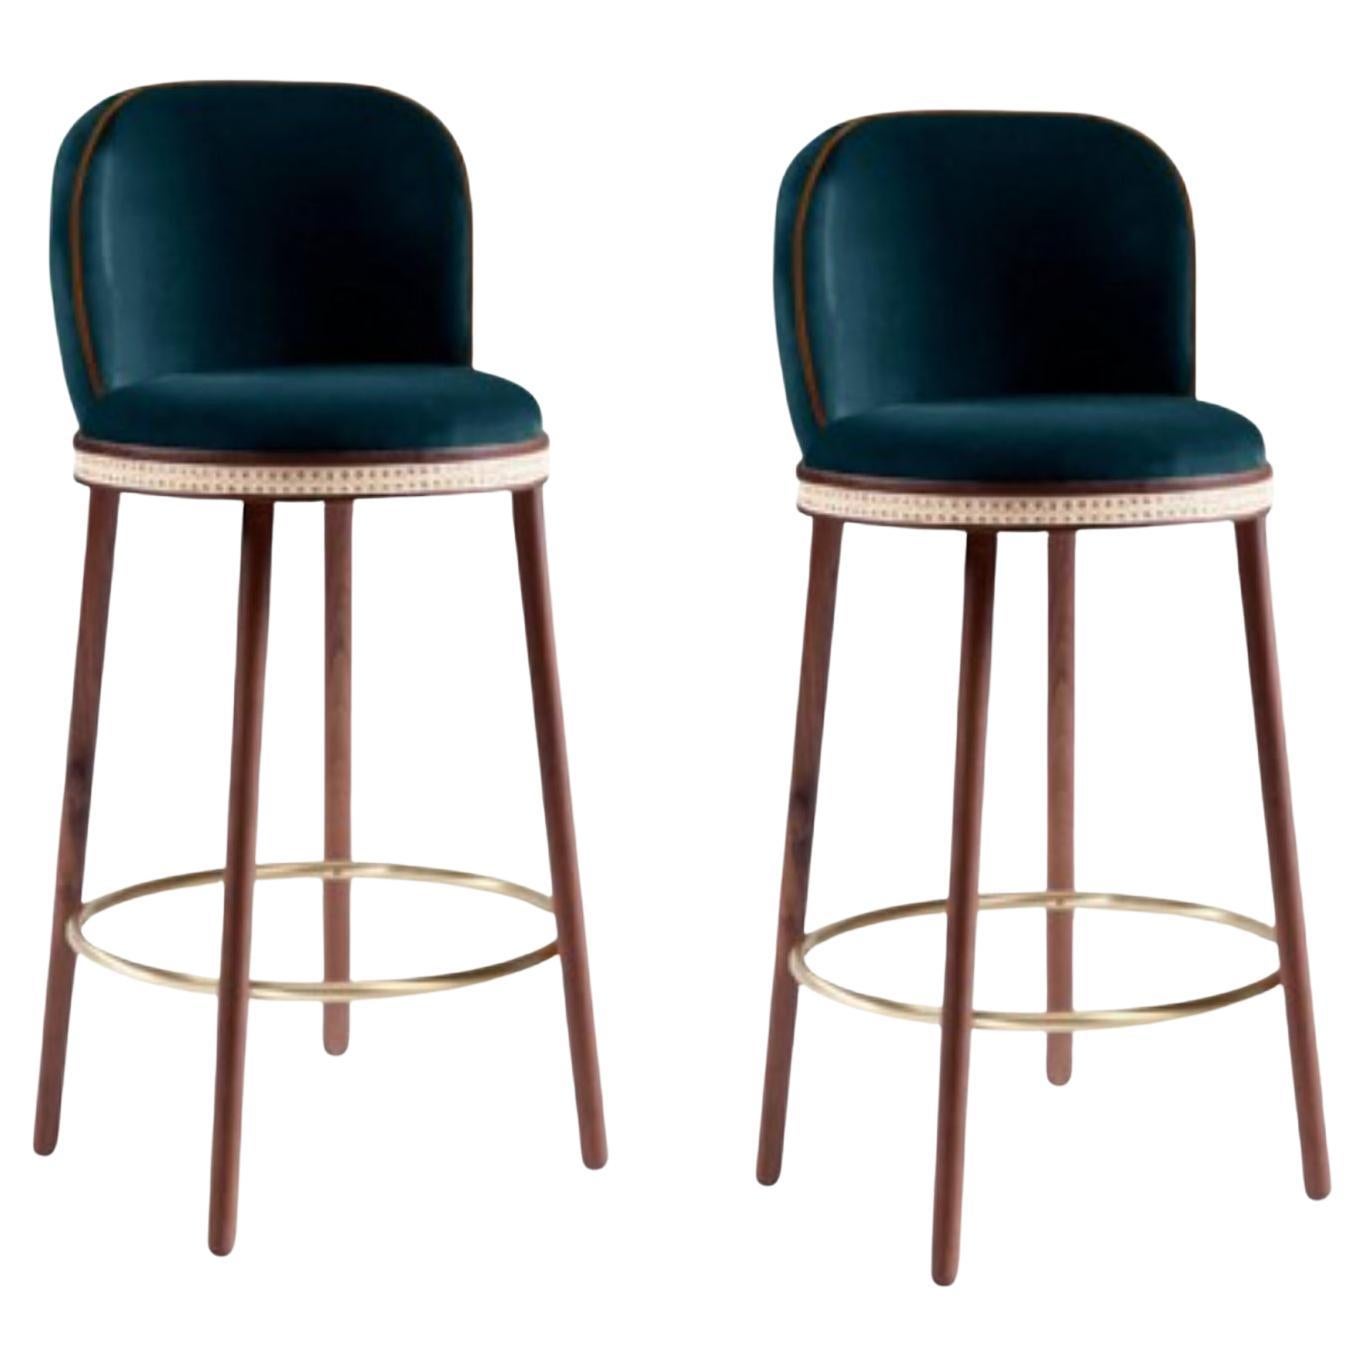 Set of 2 Bar Chairs, Alma by Dooq